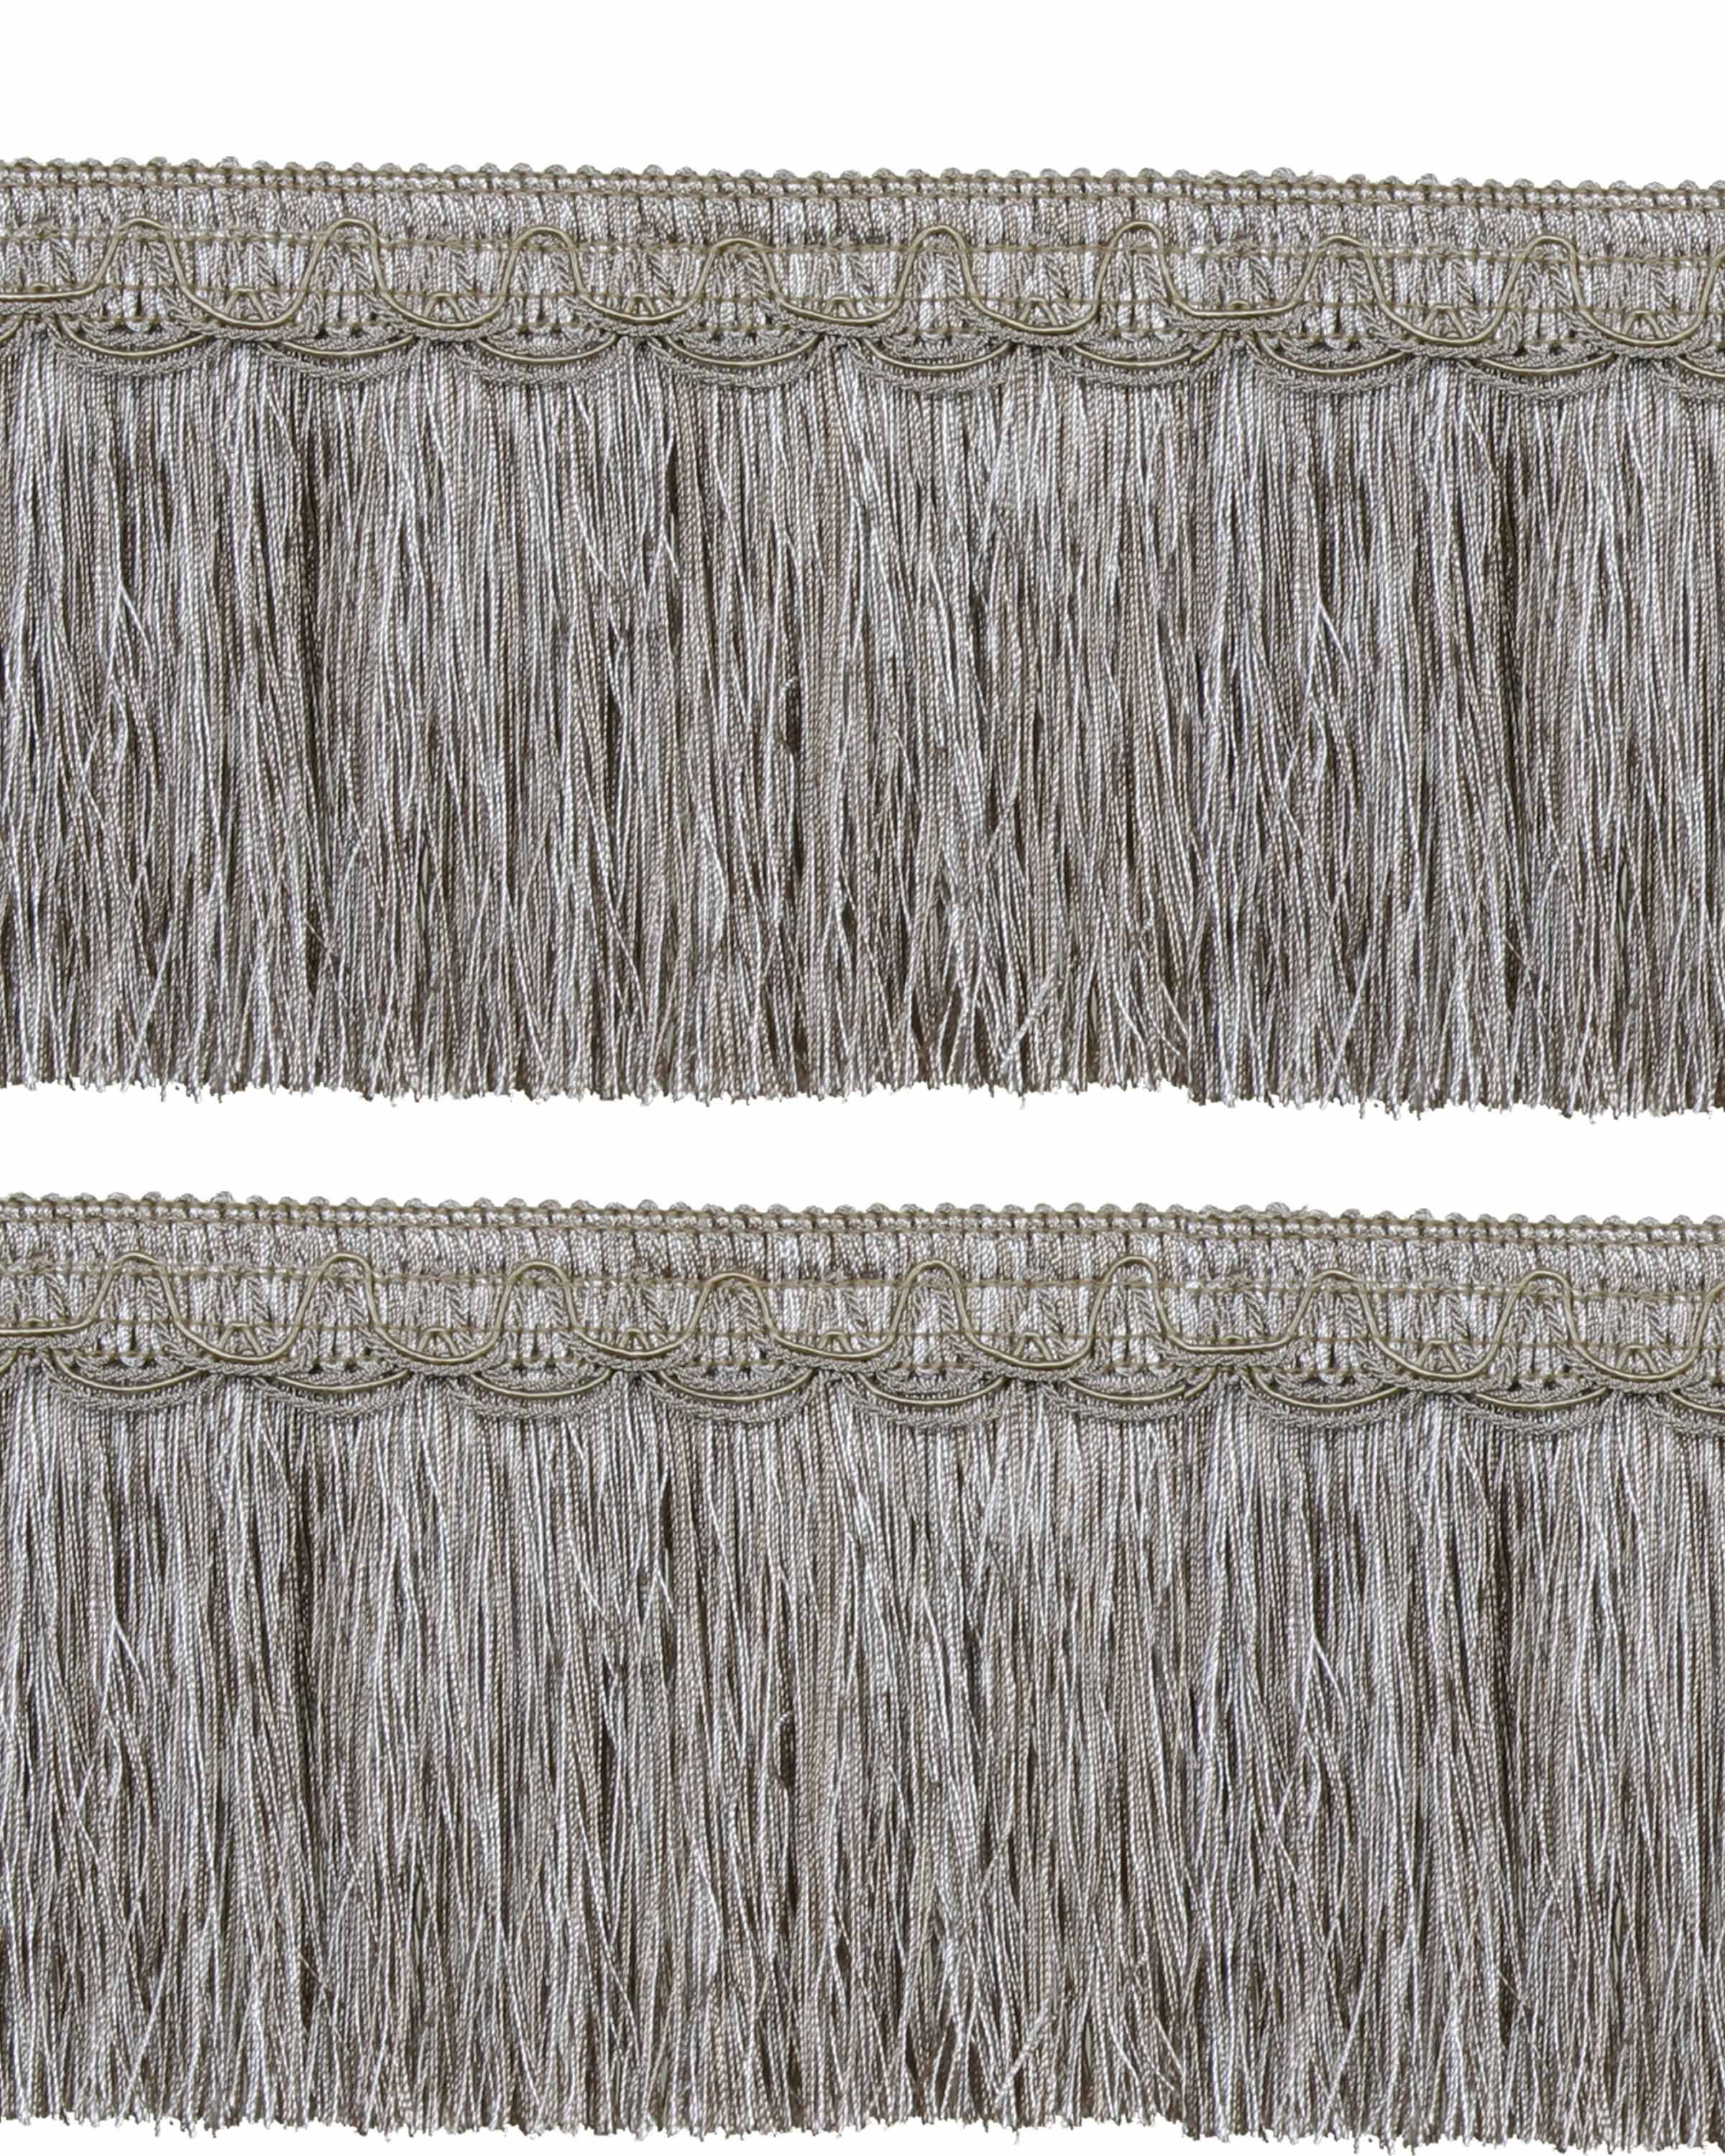 Bullion Fringe on Fancy Braid - Taupe 130mm Price is for 5 metres